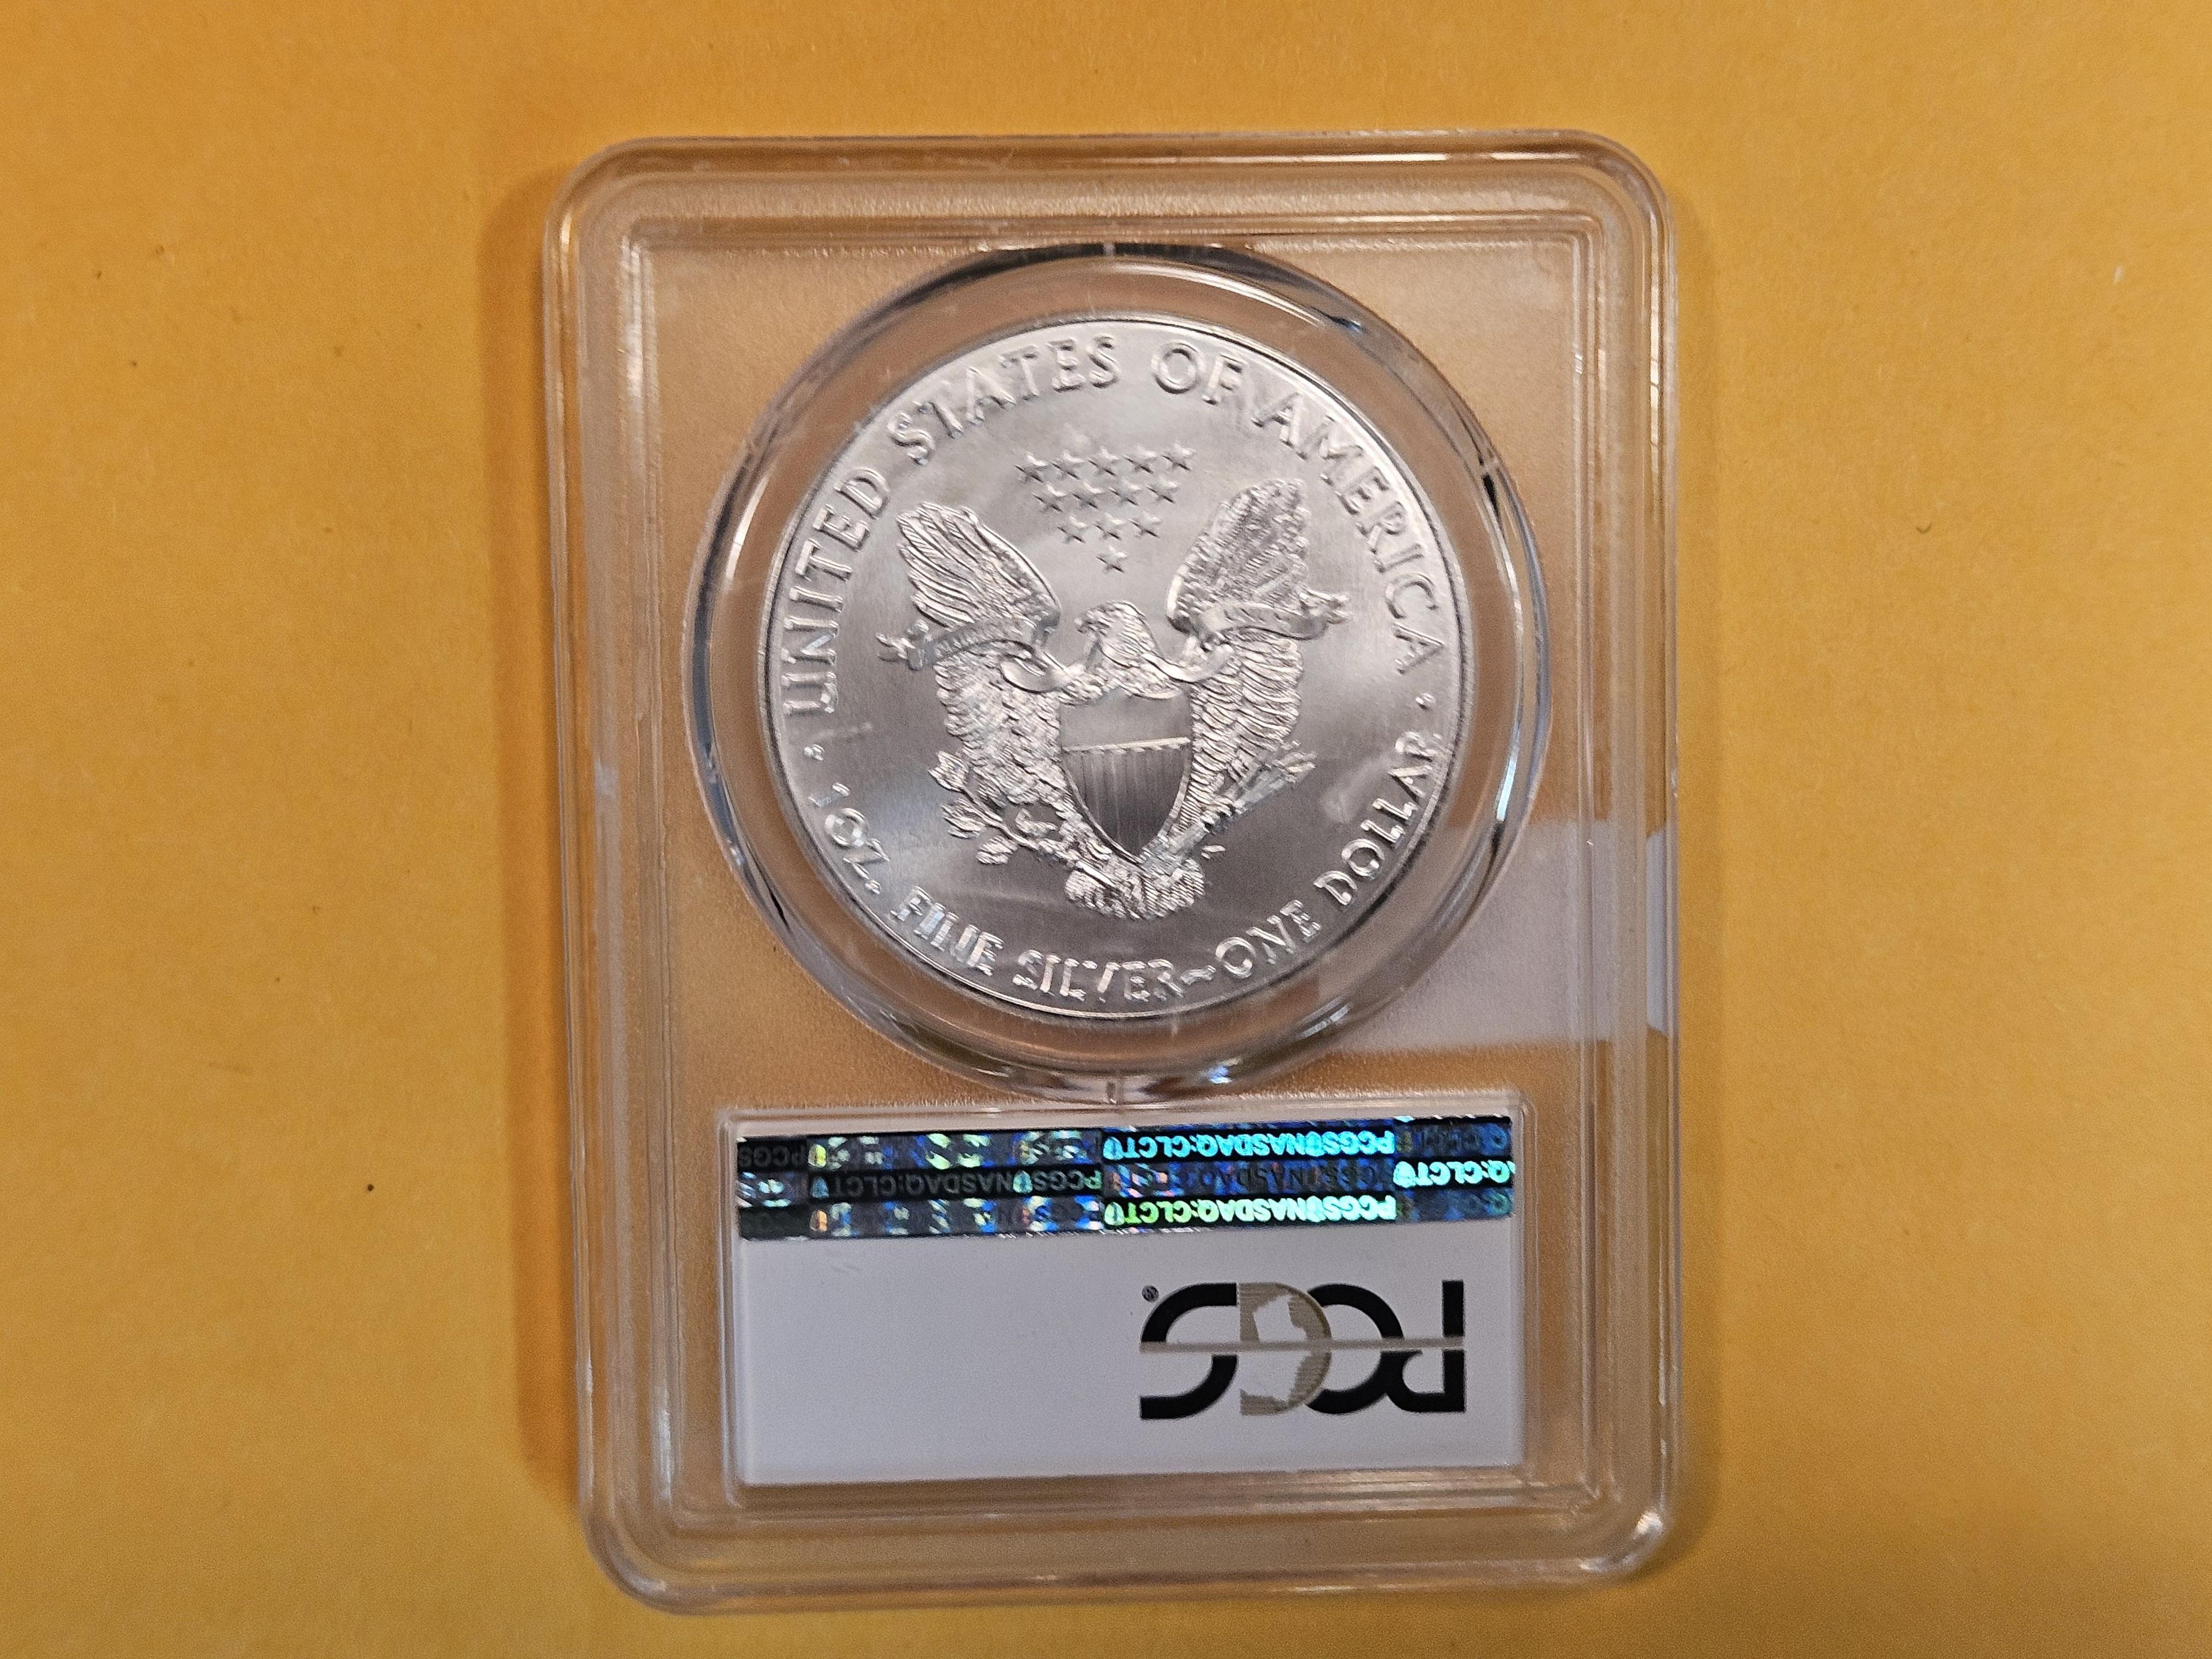 PERFECT! PCGS 2016 American Silver Eagle in Mint State 70